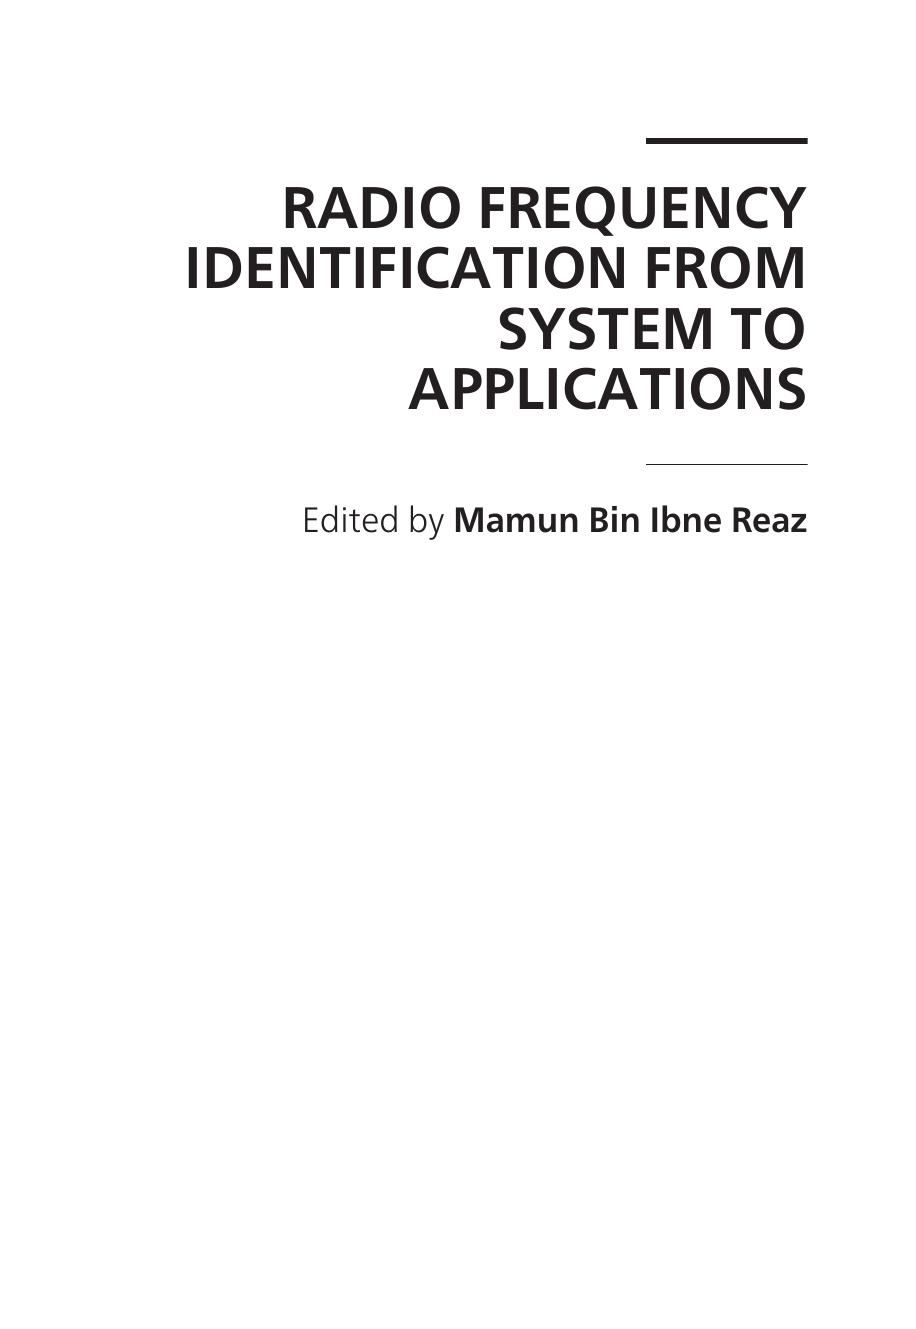 Radio Frequency Identification from System to Applications 2013.pdf